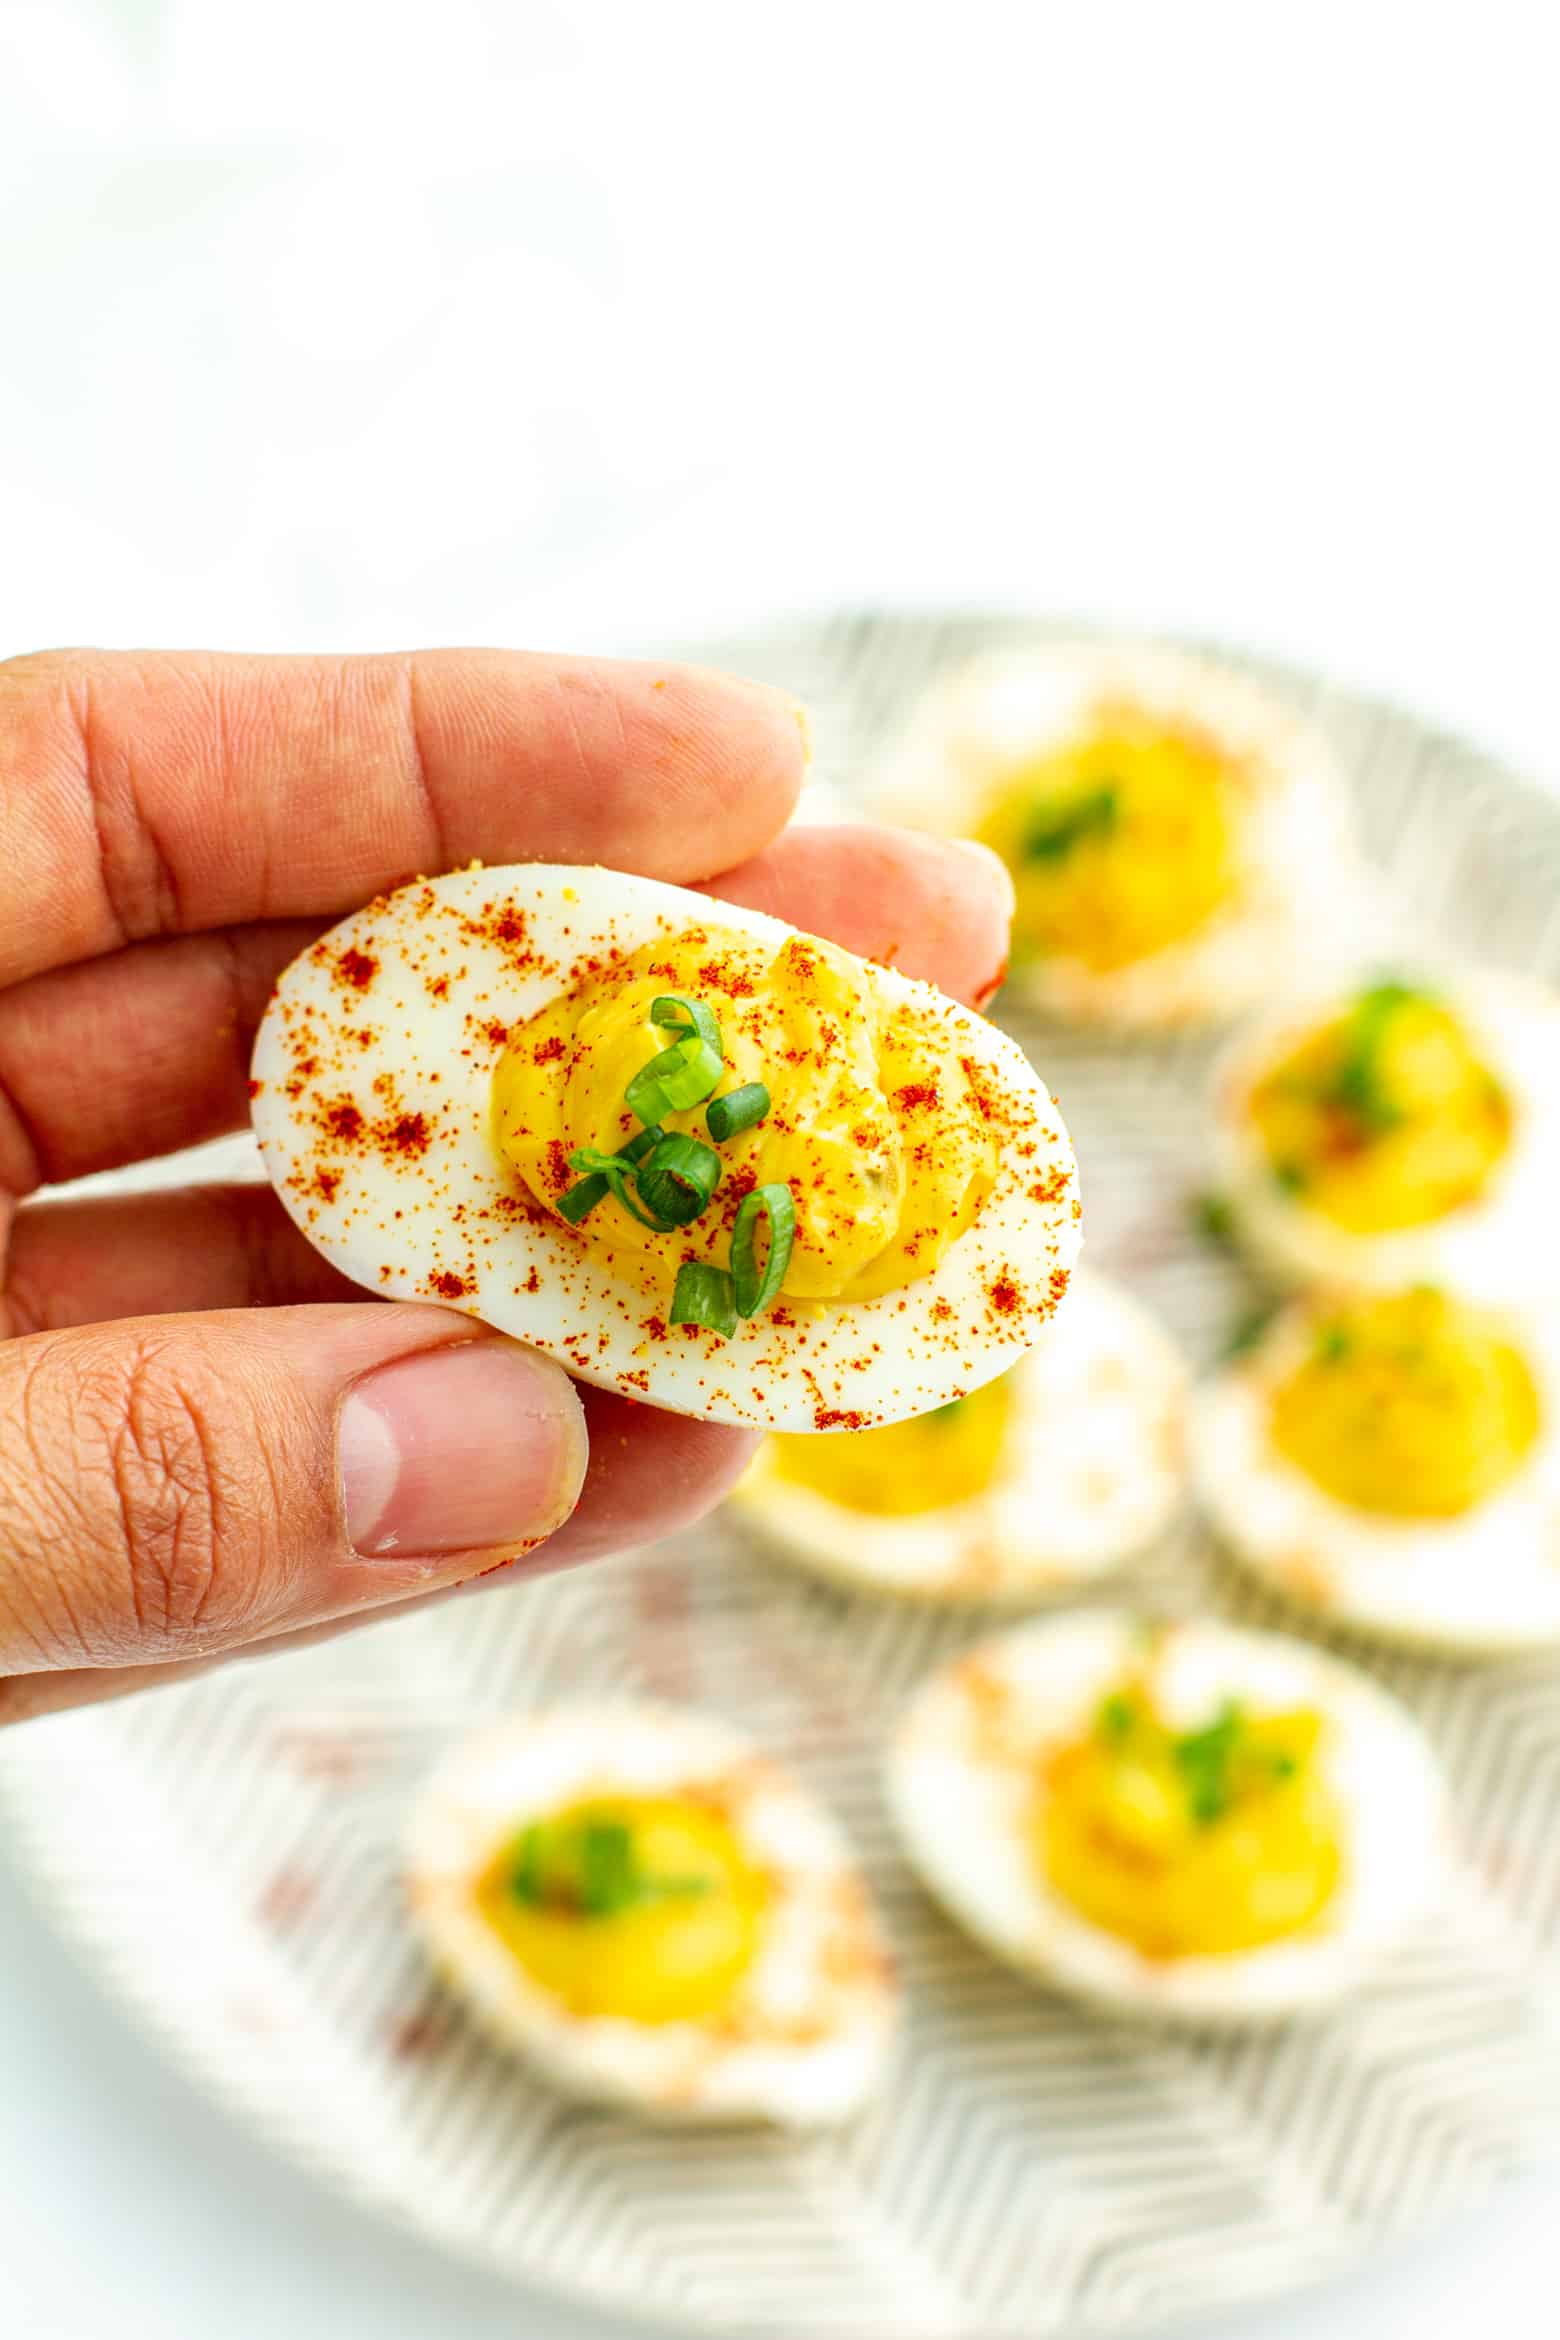 Southern Deviled Eggs being held in hand.